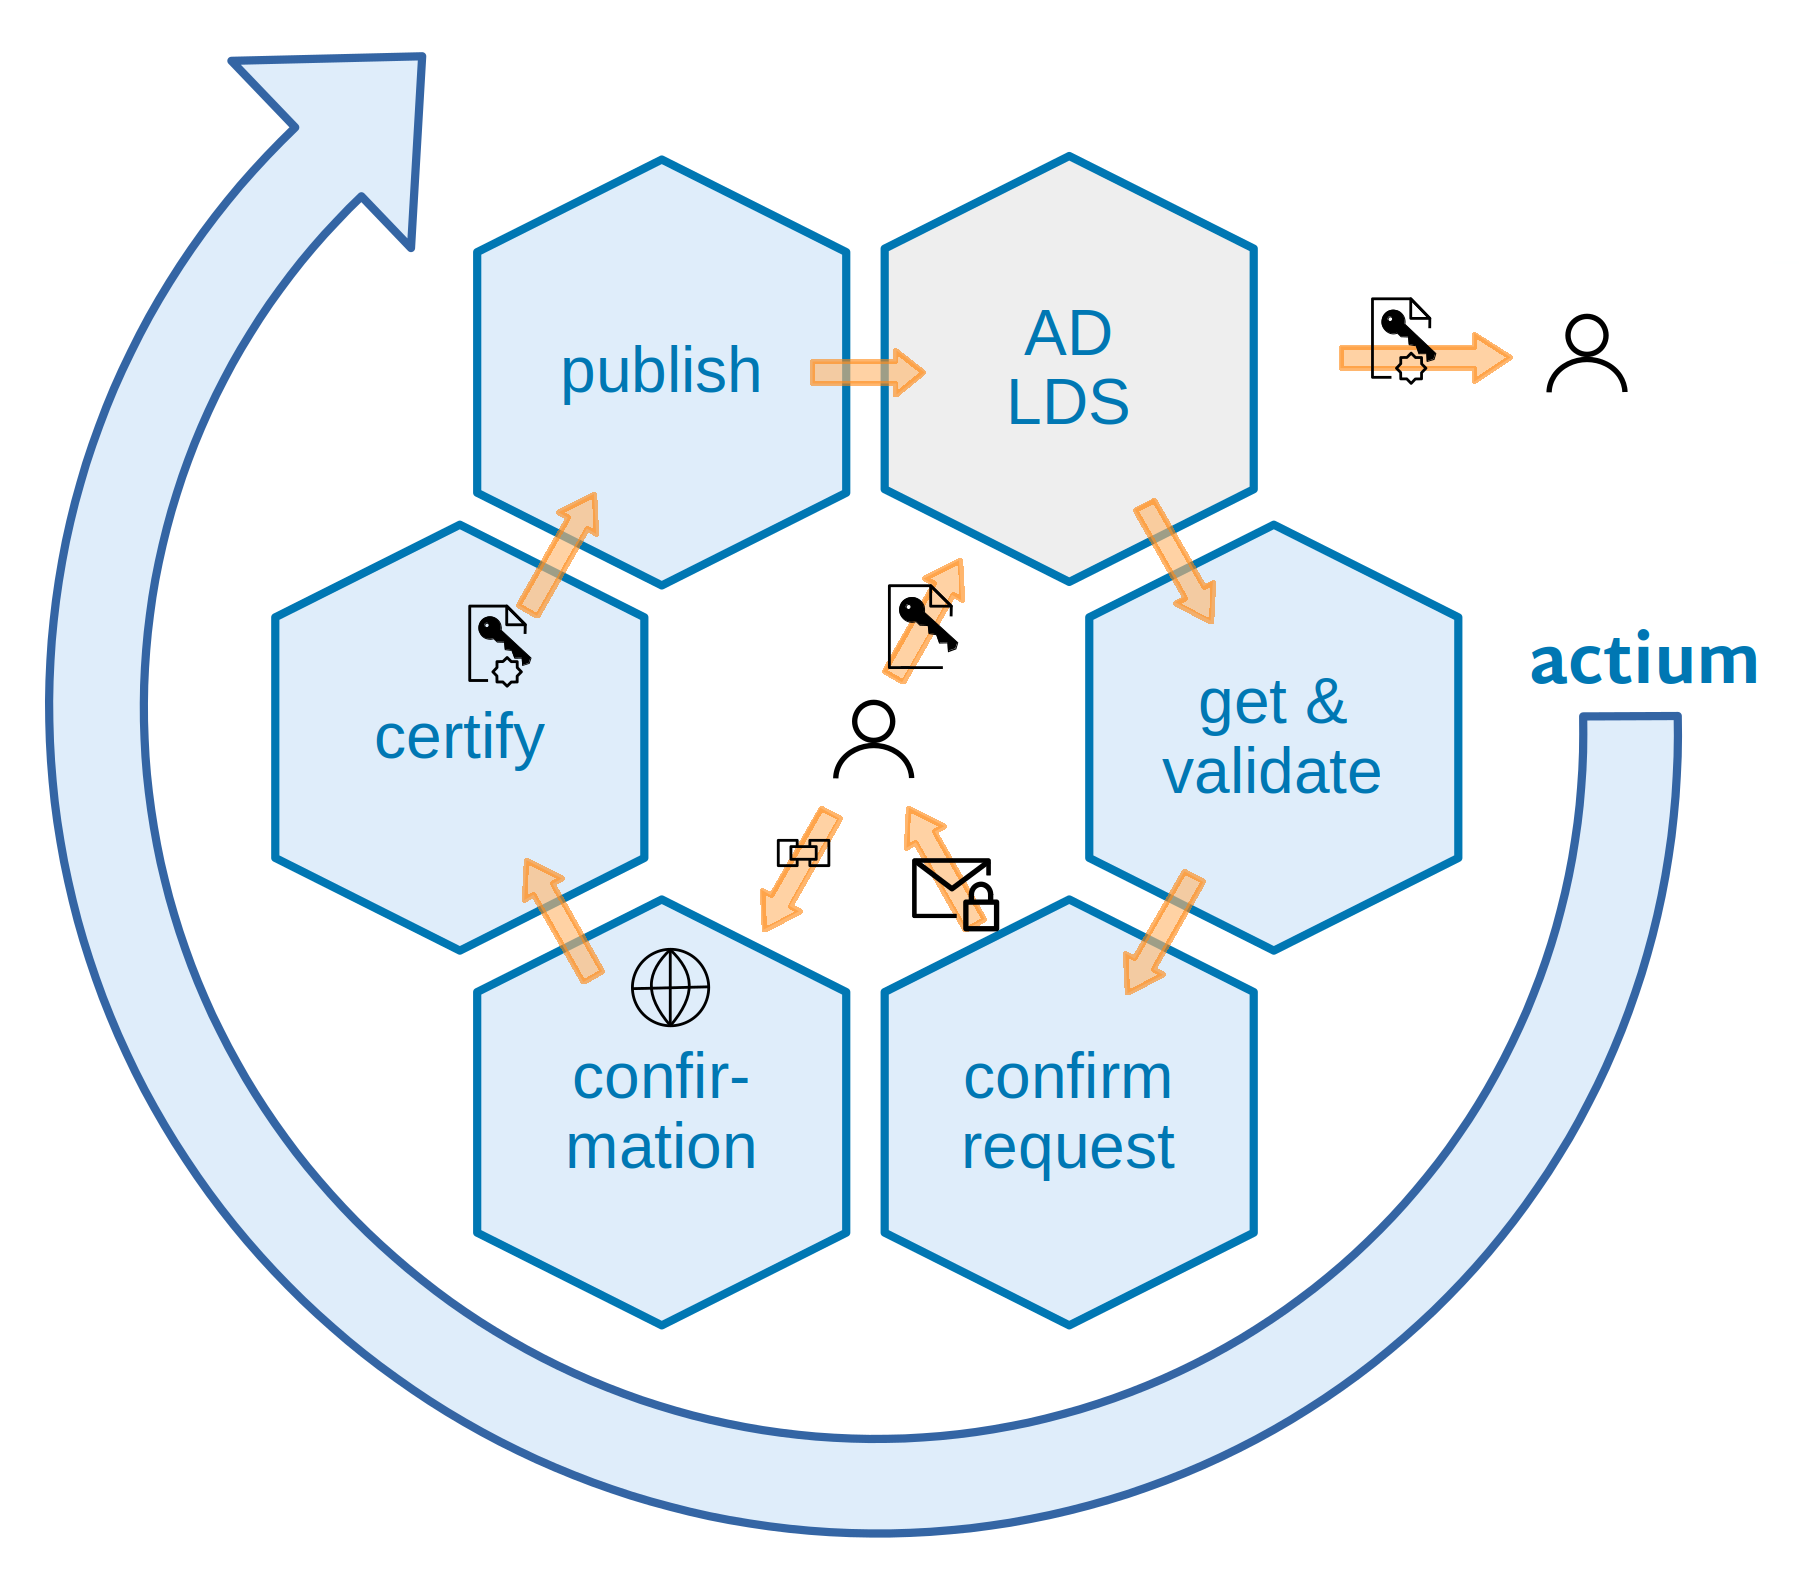 Honeycomb pattern arranged clockwise depicting the actium process steps: get+validate, confirm request, confirmation, certify, and publish (submission to directory service)